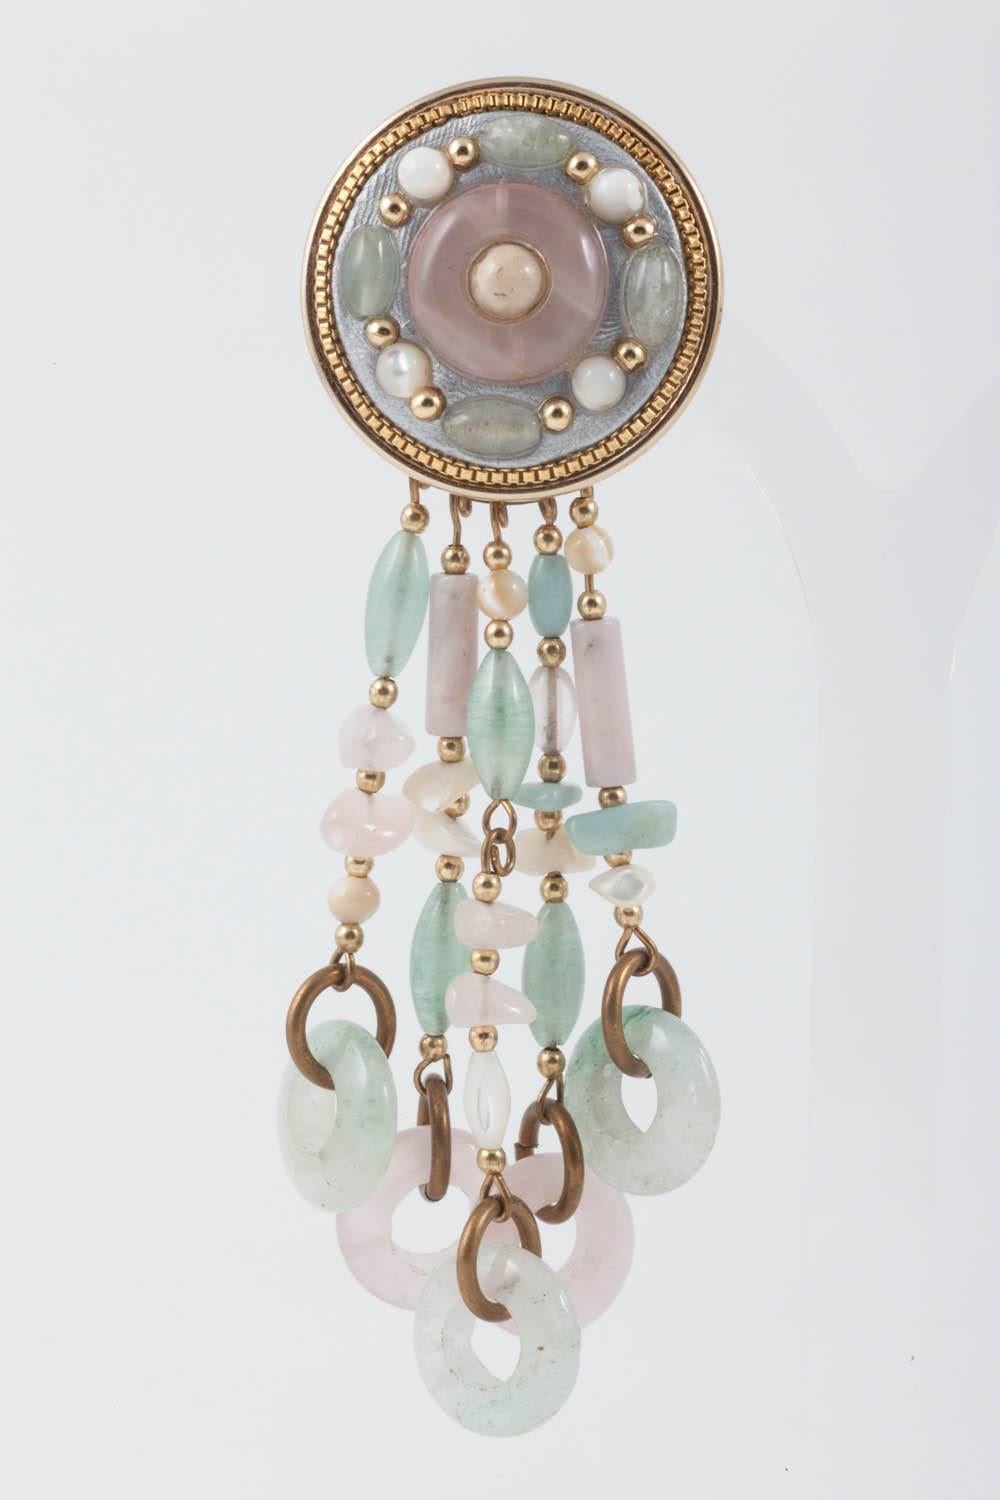 Very attractive long drop earrings, in jade , rose quartz, with mother of pearl chips, by Michal Golan of New York. The drop section of the earring is detachable (a ring, holding all five drops, lifts on or off the ear clip.), making them a very